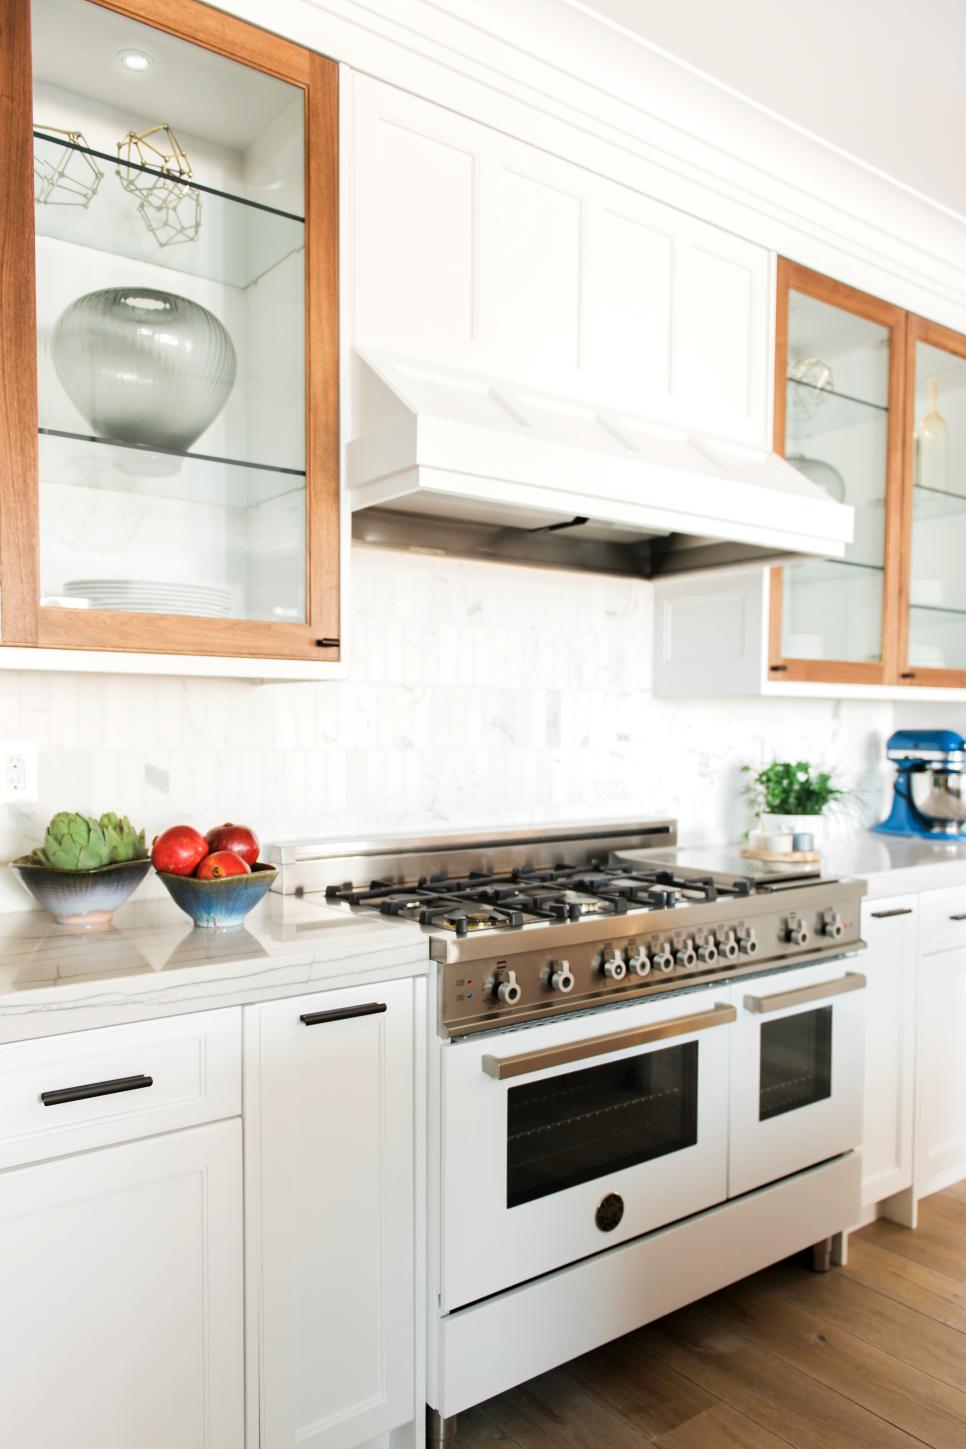 White Contemporary Kitchen With Wood Accents | HGTV Faces of Design | HGTV